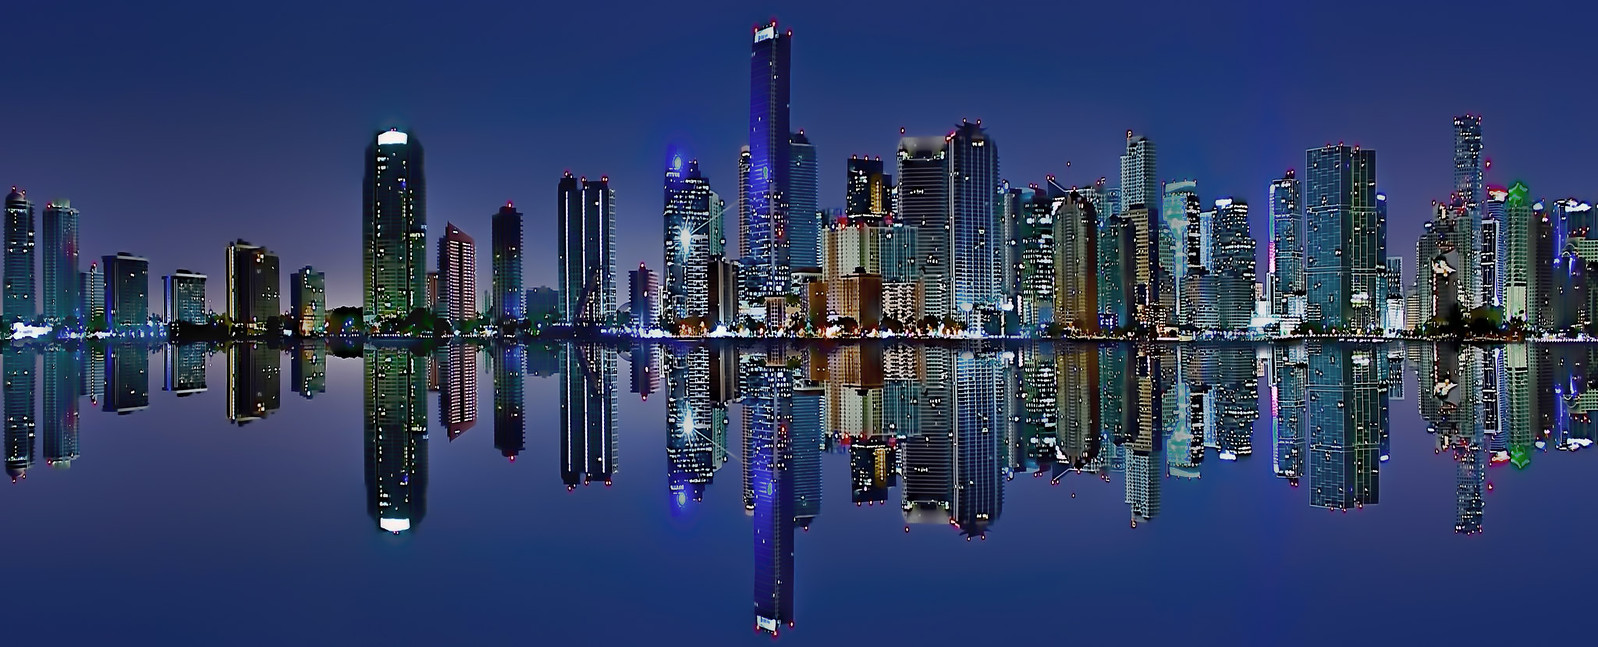 The skyline of Miami, Florida, U.S.A. along Biscayne Bay at the Blue Hour.